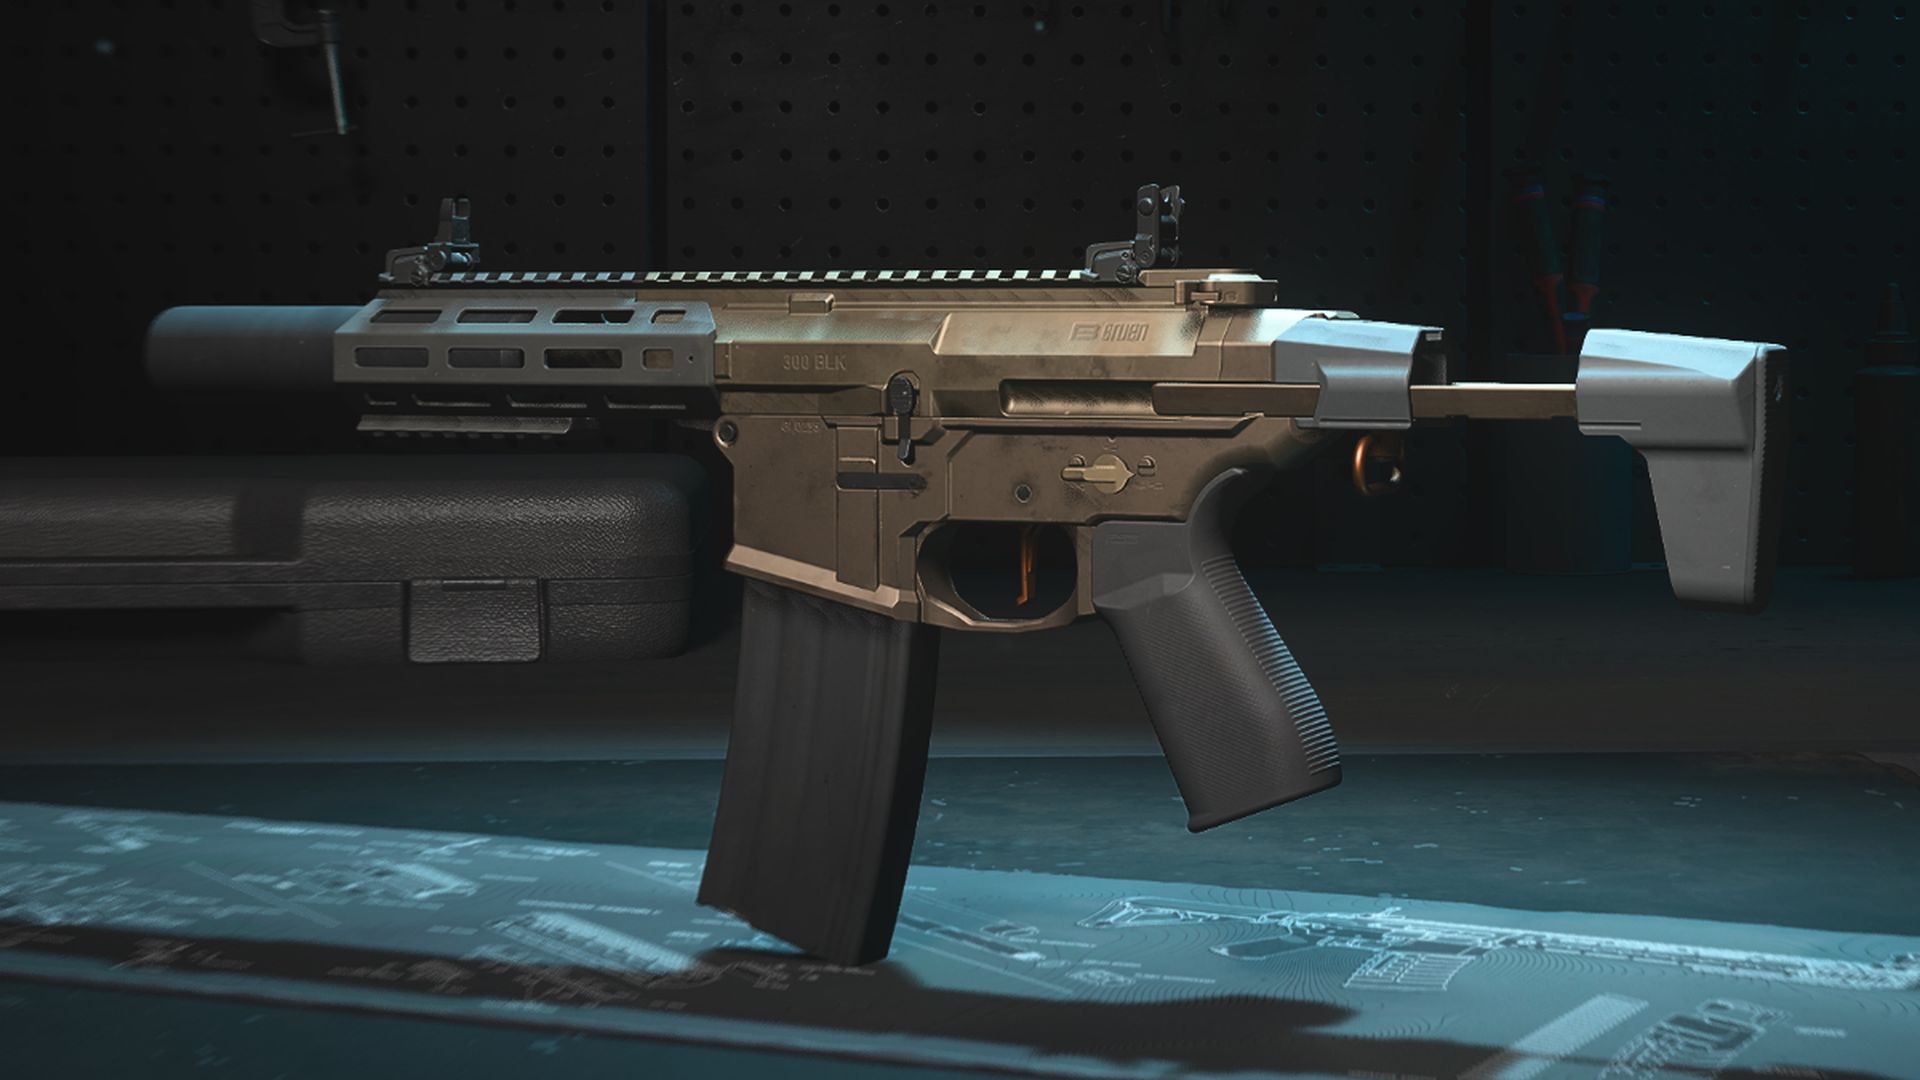 Chimera takes up the 8th place in our best AR in Warzone 2.0 list only because of its high fire rate